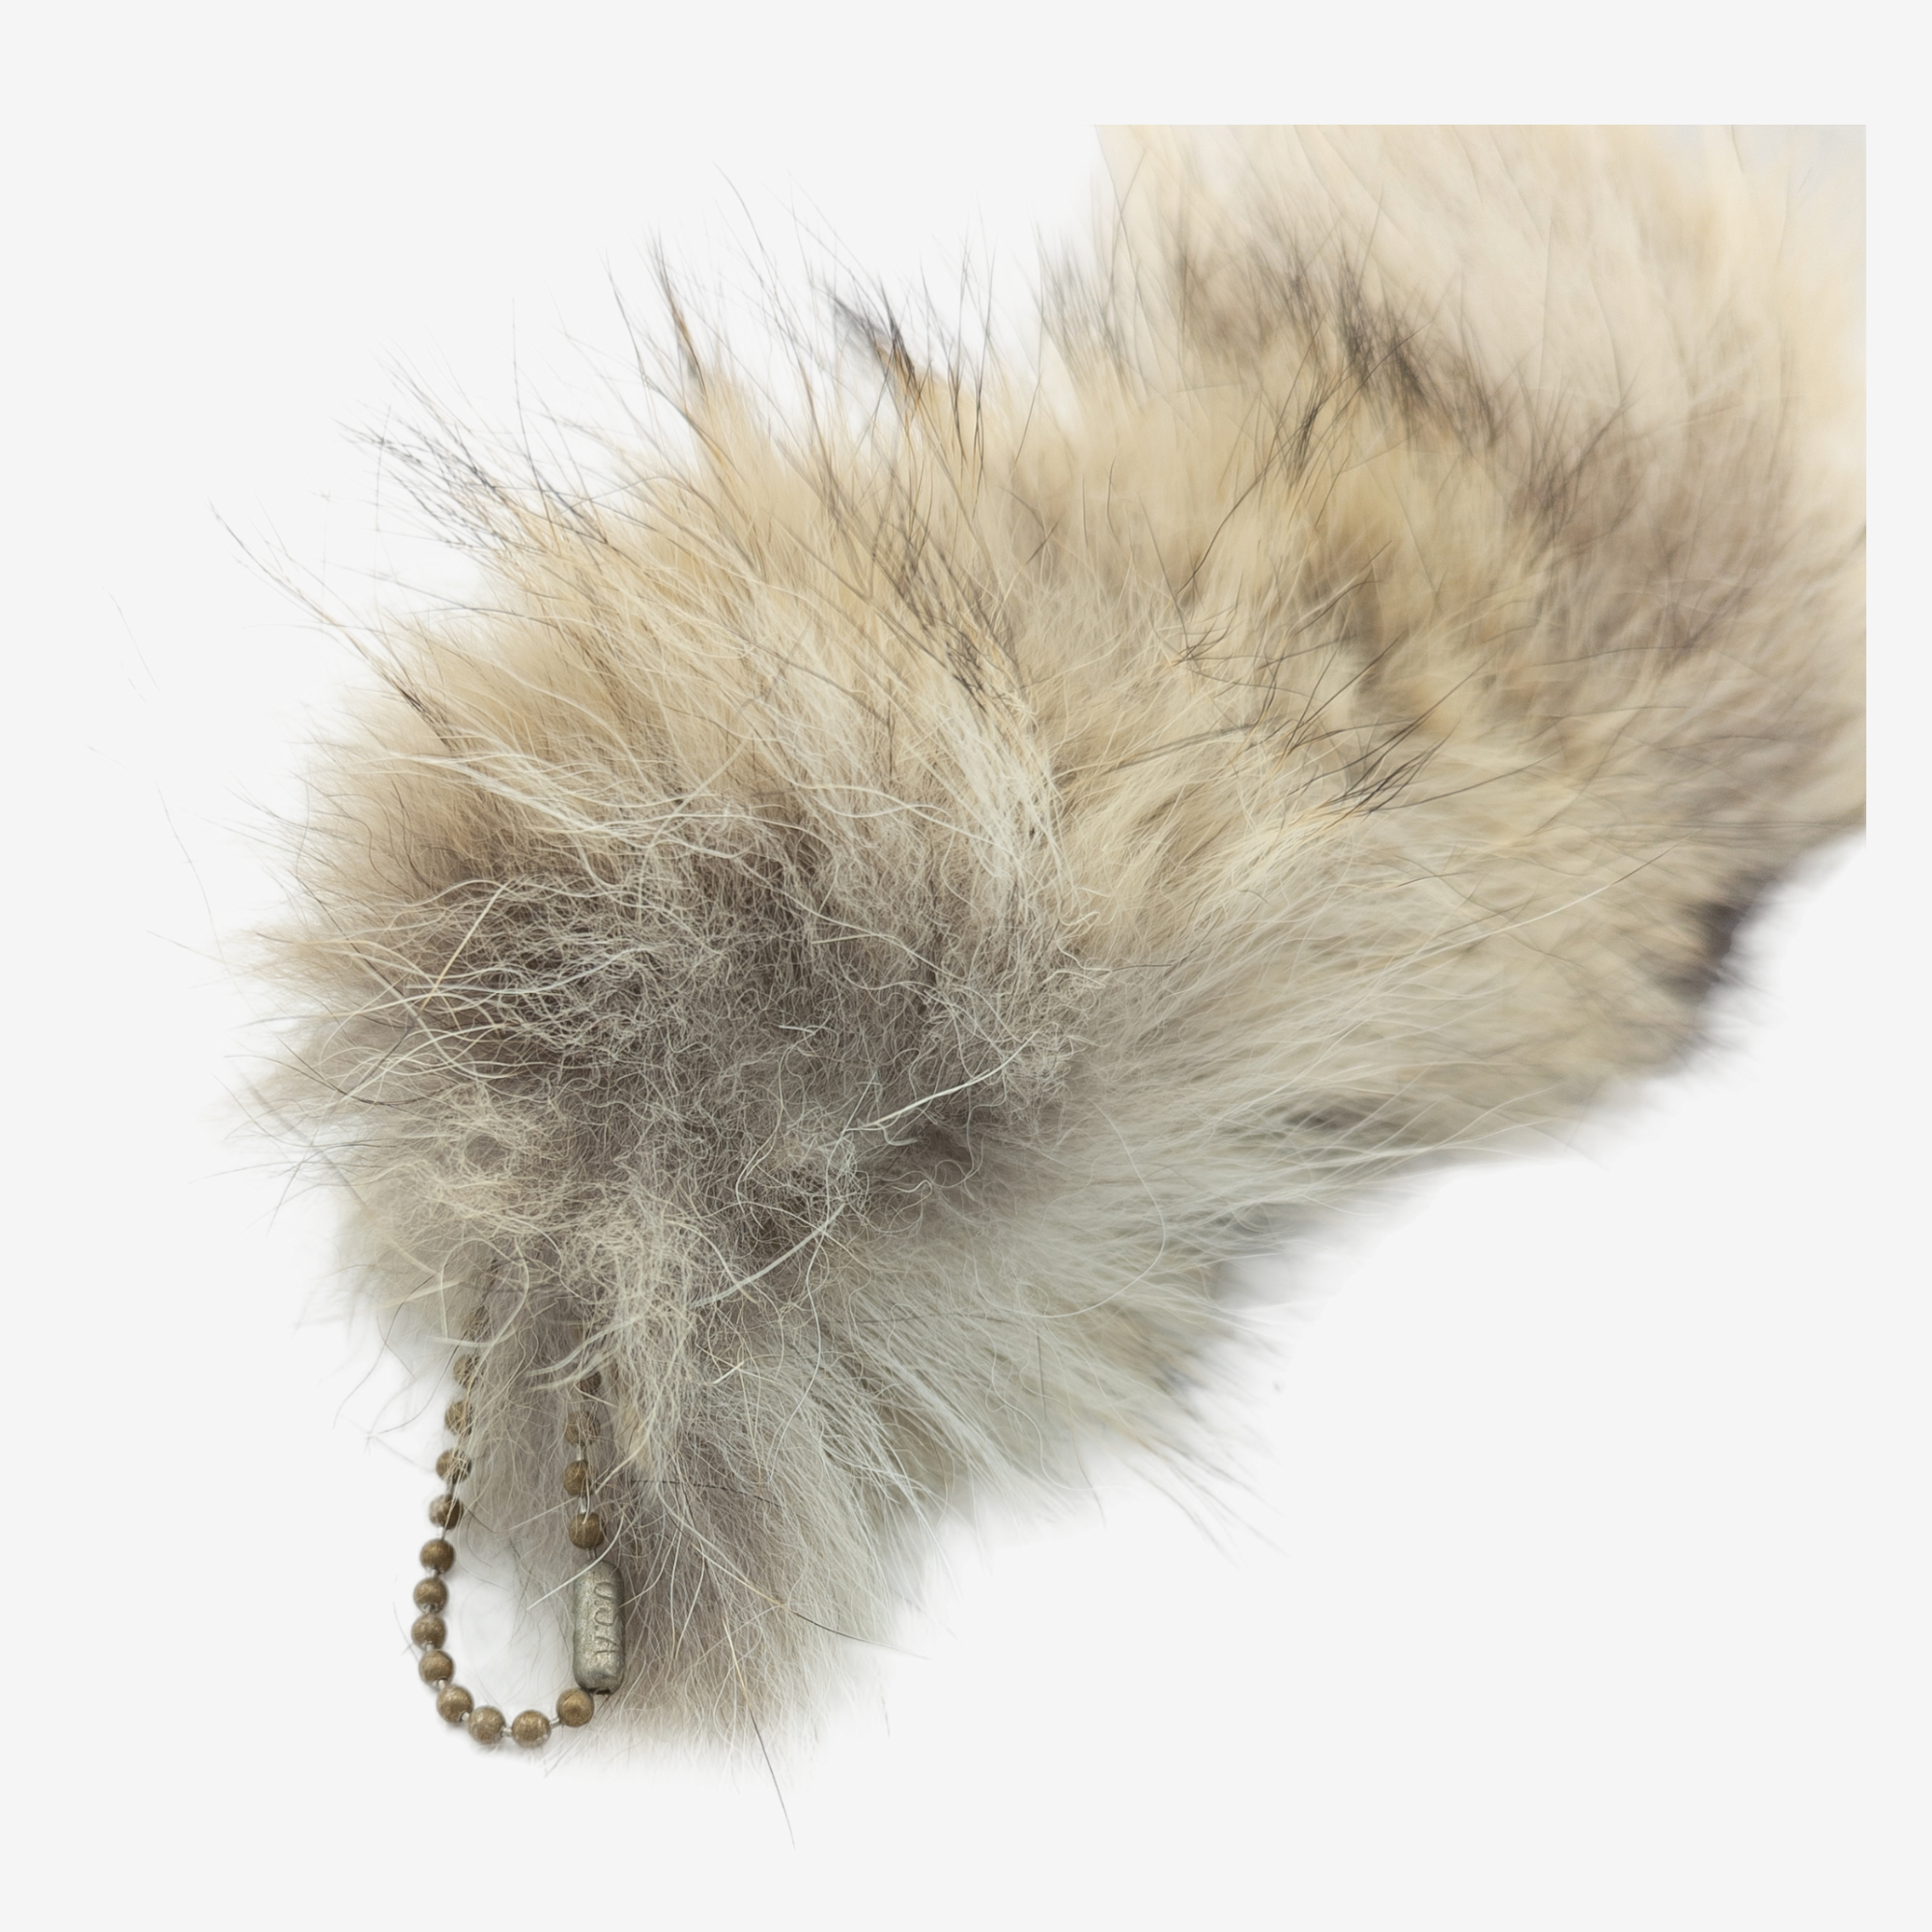 Tanned Coyote Tail Keychain